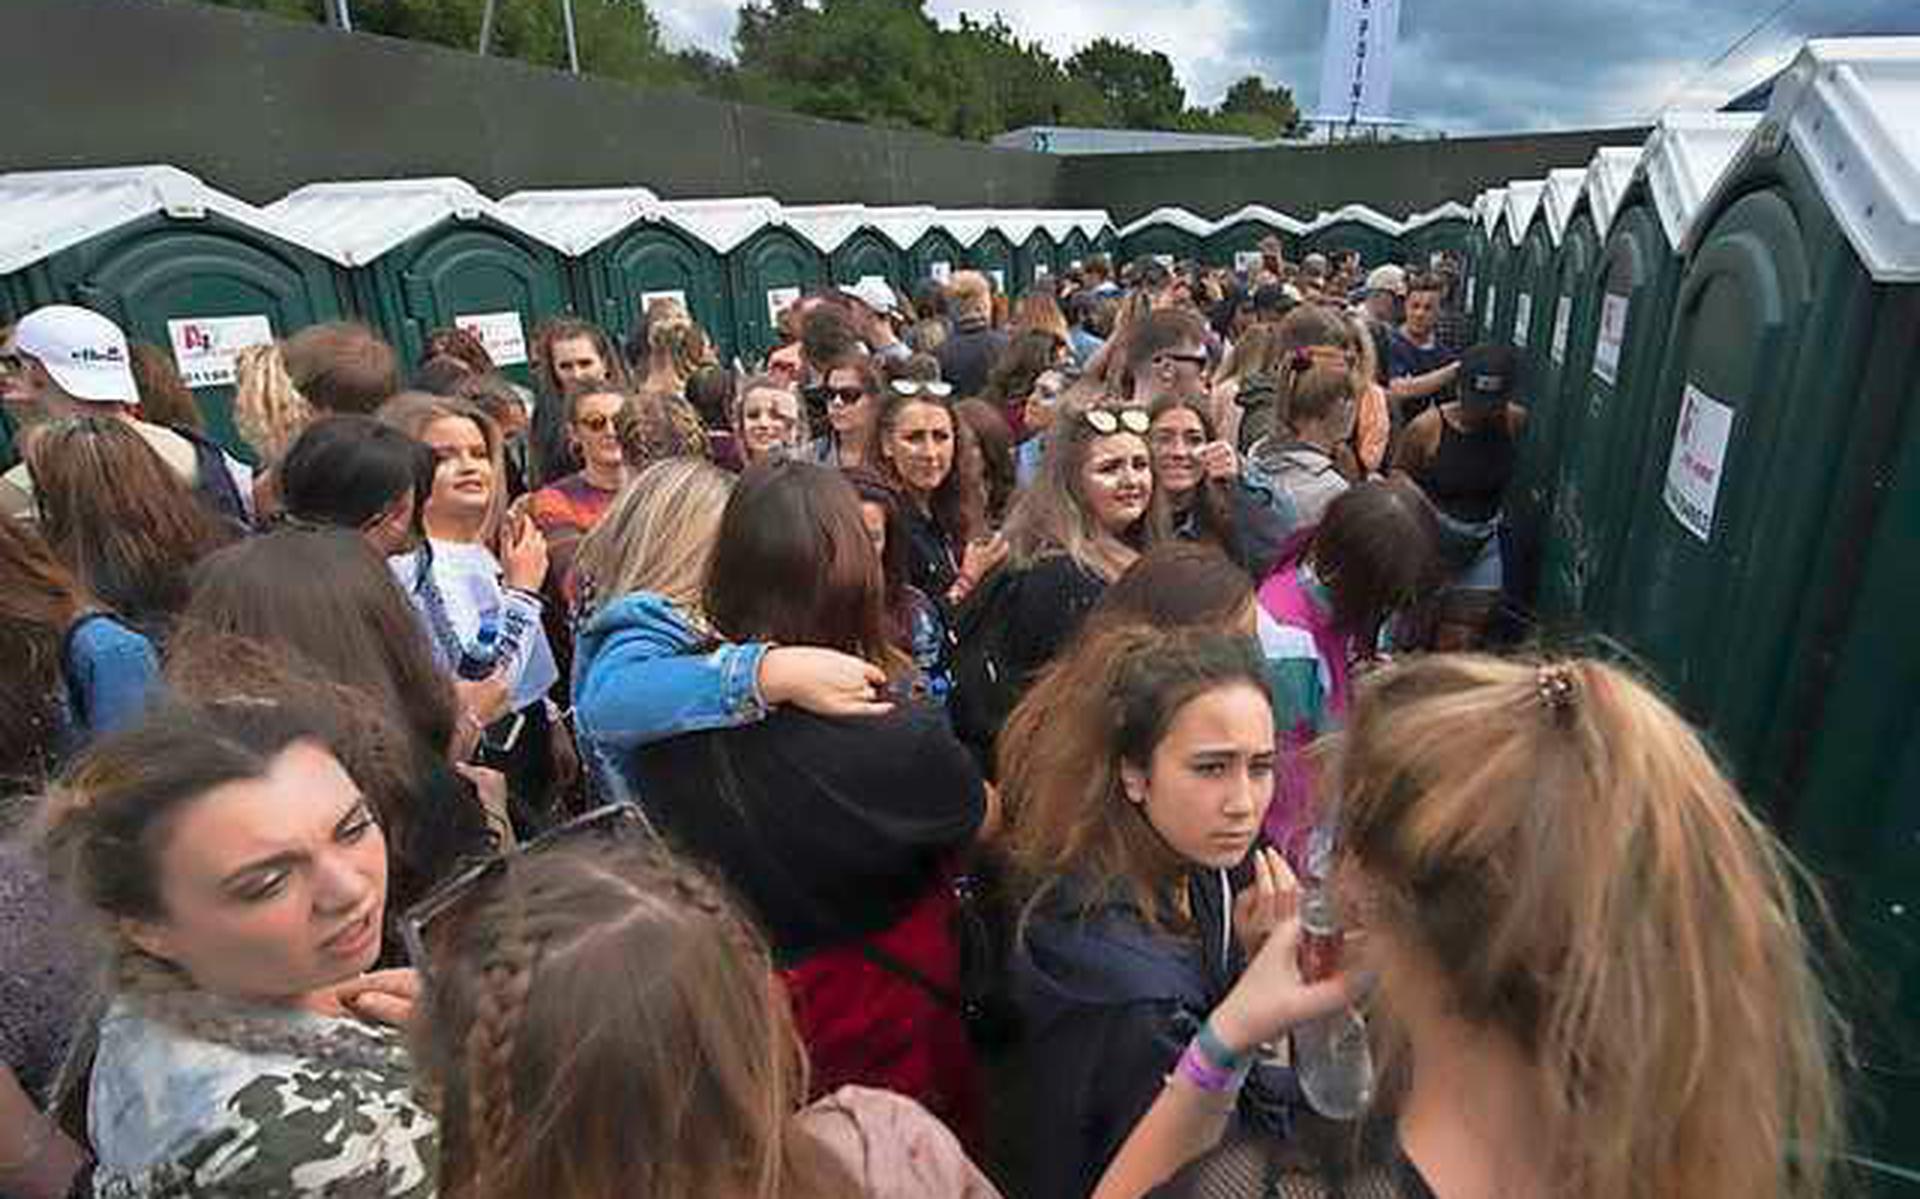 The professor comes up with a simple solution to the long queues in front of women’s toilets at festivals